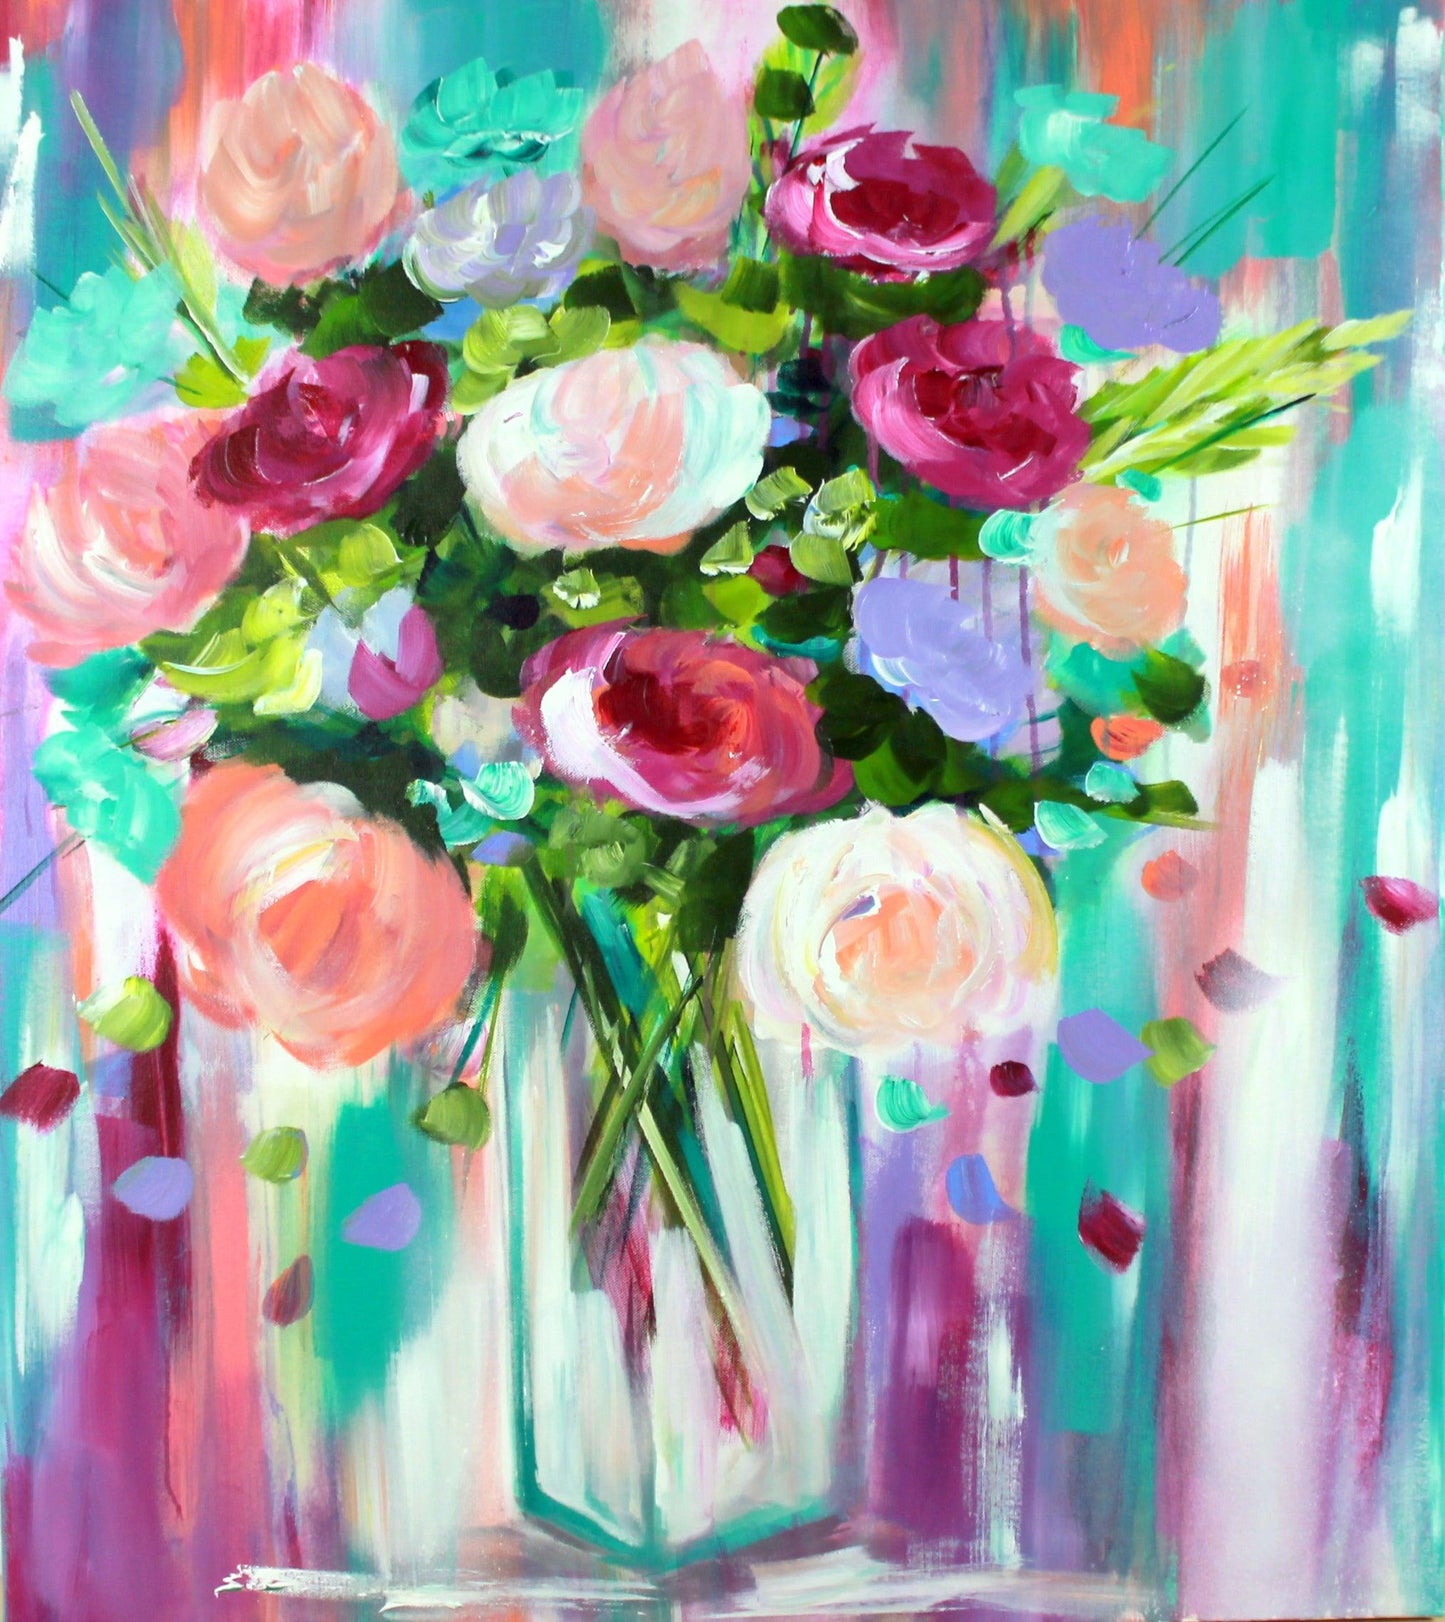 Flowers just for you - 700 x 800 - Original Artwork - Available by Commission